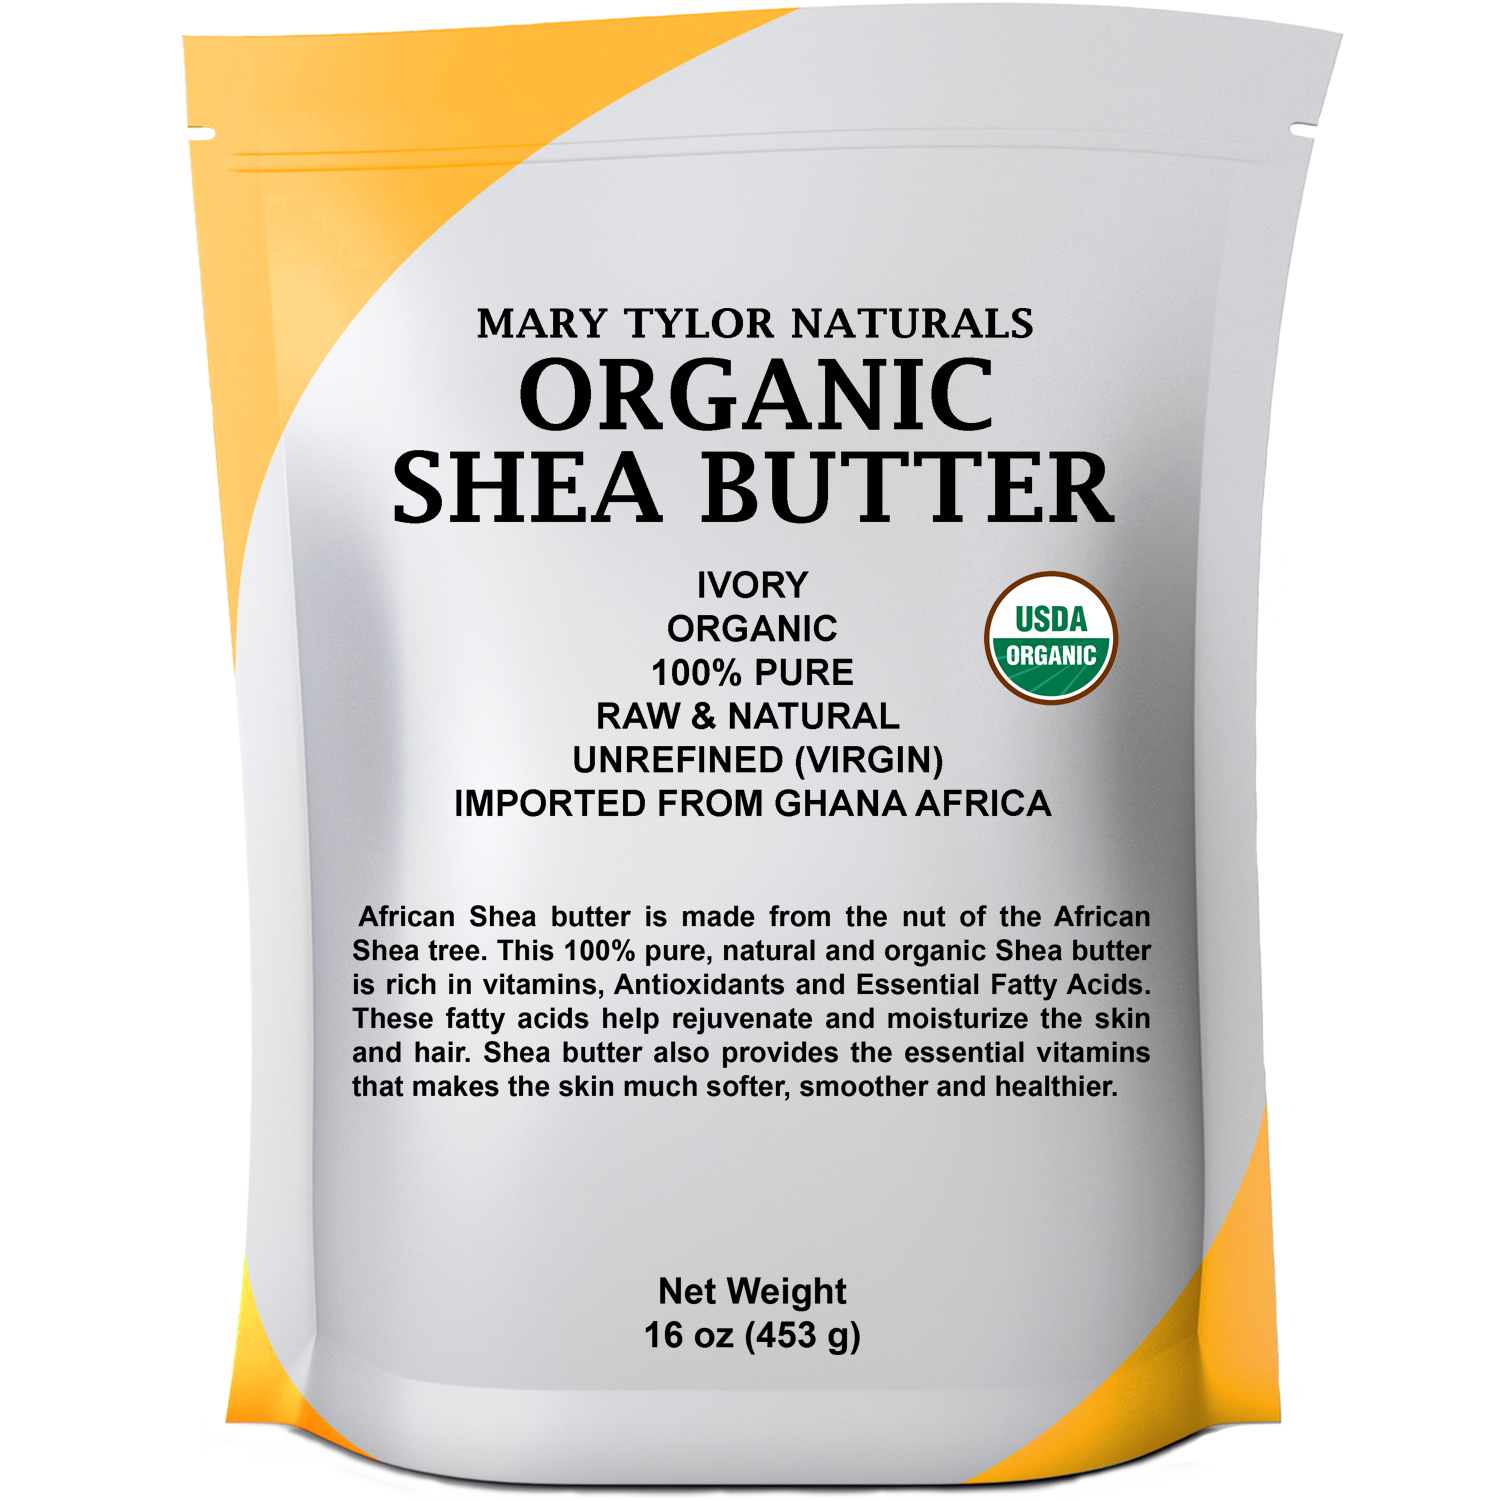 Organic Shea Butter 1 lb (16 Oz) Raw Unrefined Ivory Grade A. Amazing Skin Nourishment, Great For DIY Body Butters Lip Balms Lotions Acne Eczema & Stretch Marks By Mary Tyler Naturals - image 4 of 5